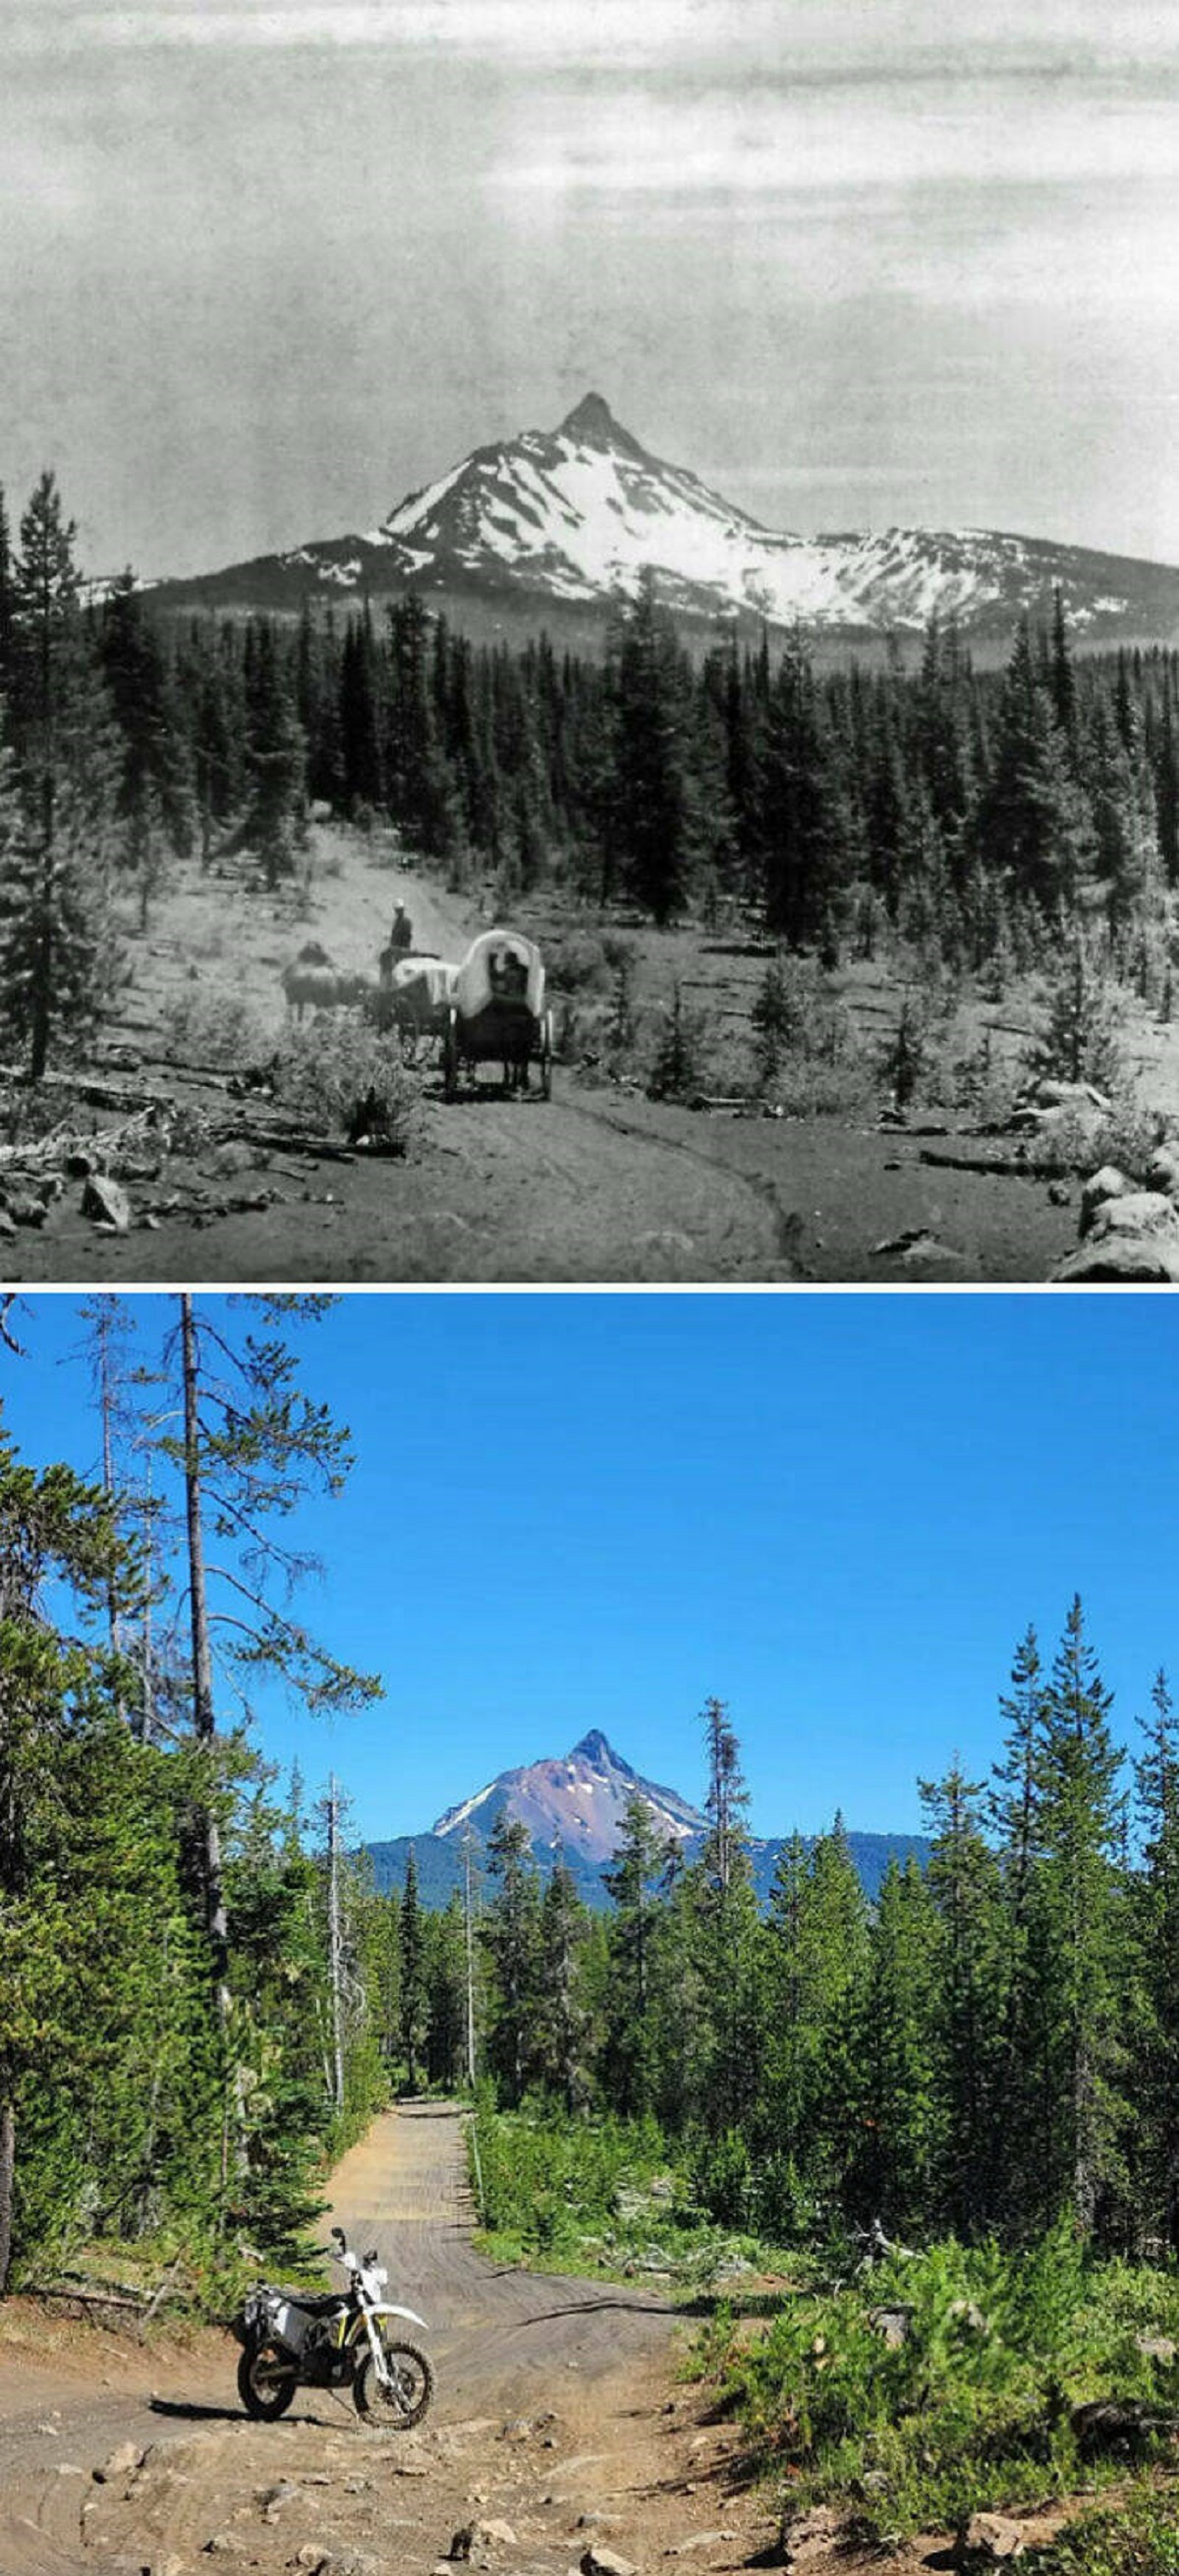 "Tried My Best To Find The Same Location. Satiam Wagon Road, Oregon. 2022 vs. Date Unknown. Road Was Used 1860-1930s"